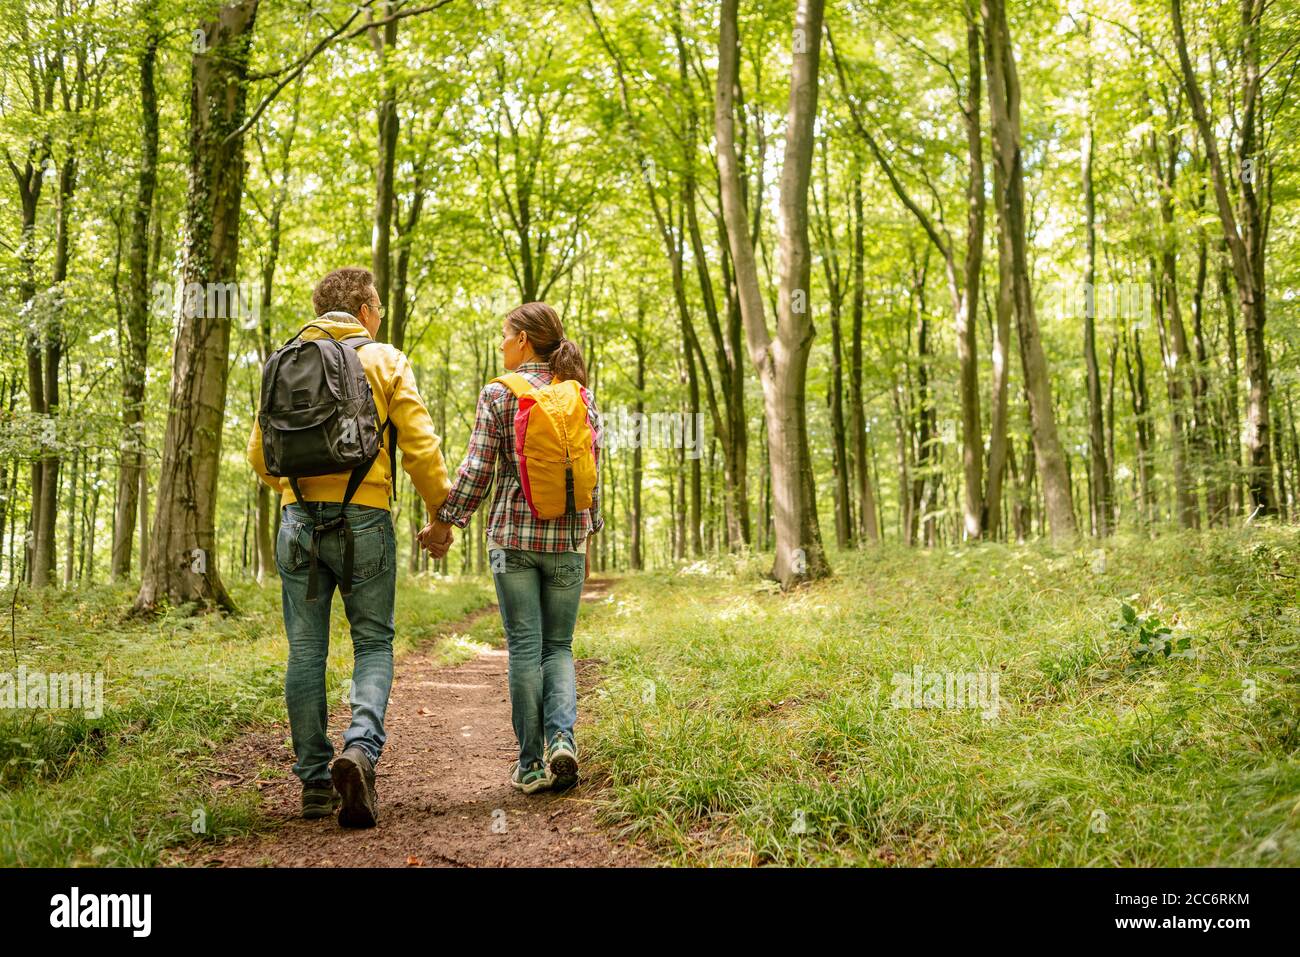 male and female backpackers walking through a forest holding hands Stock Photo